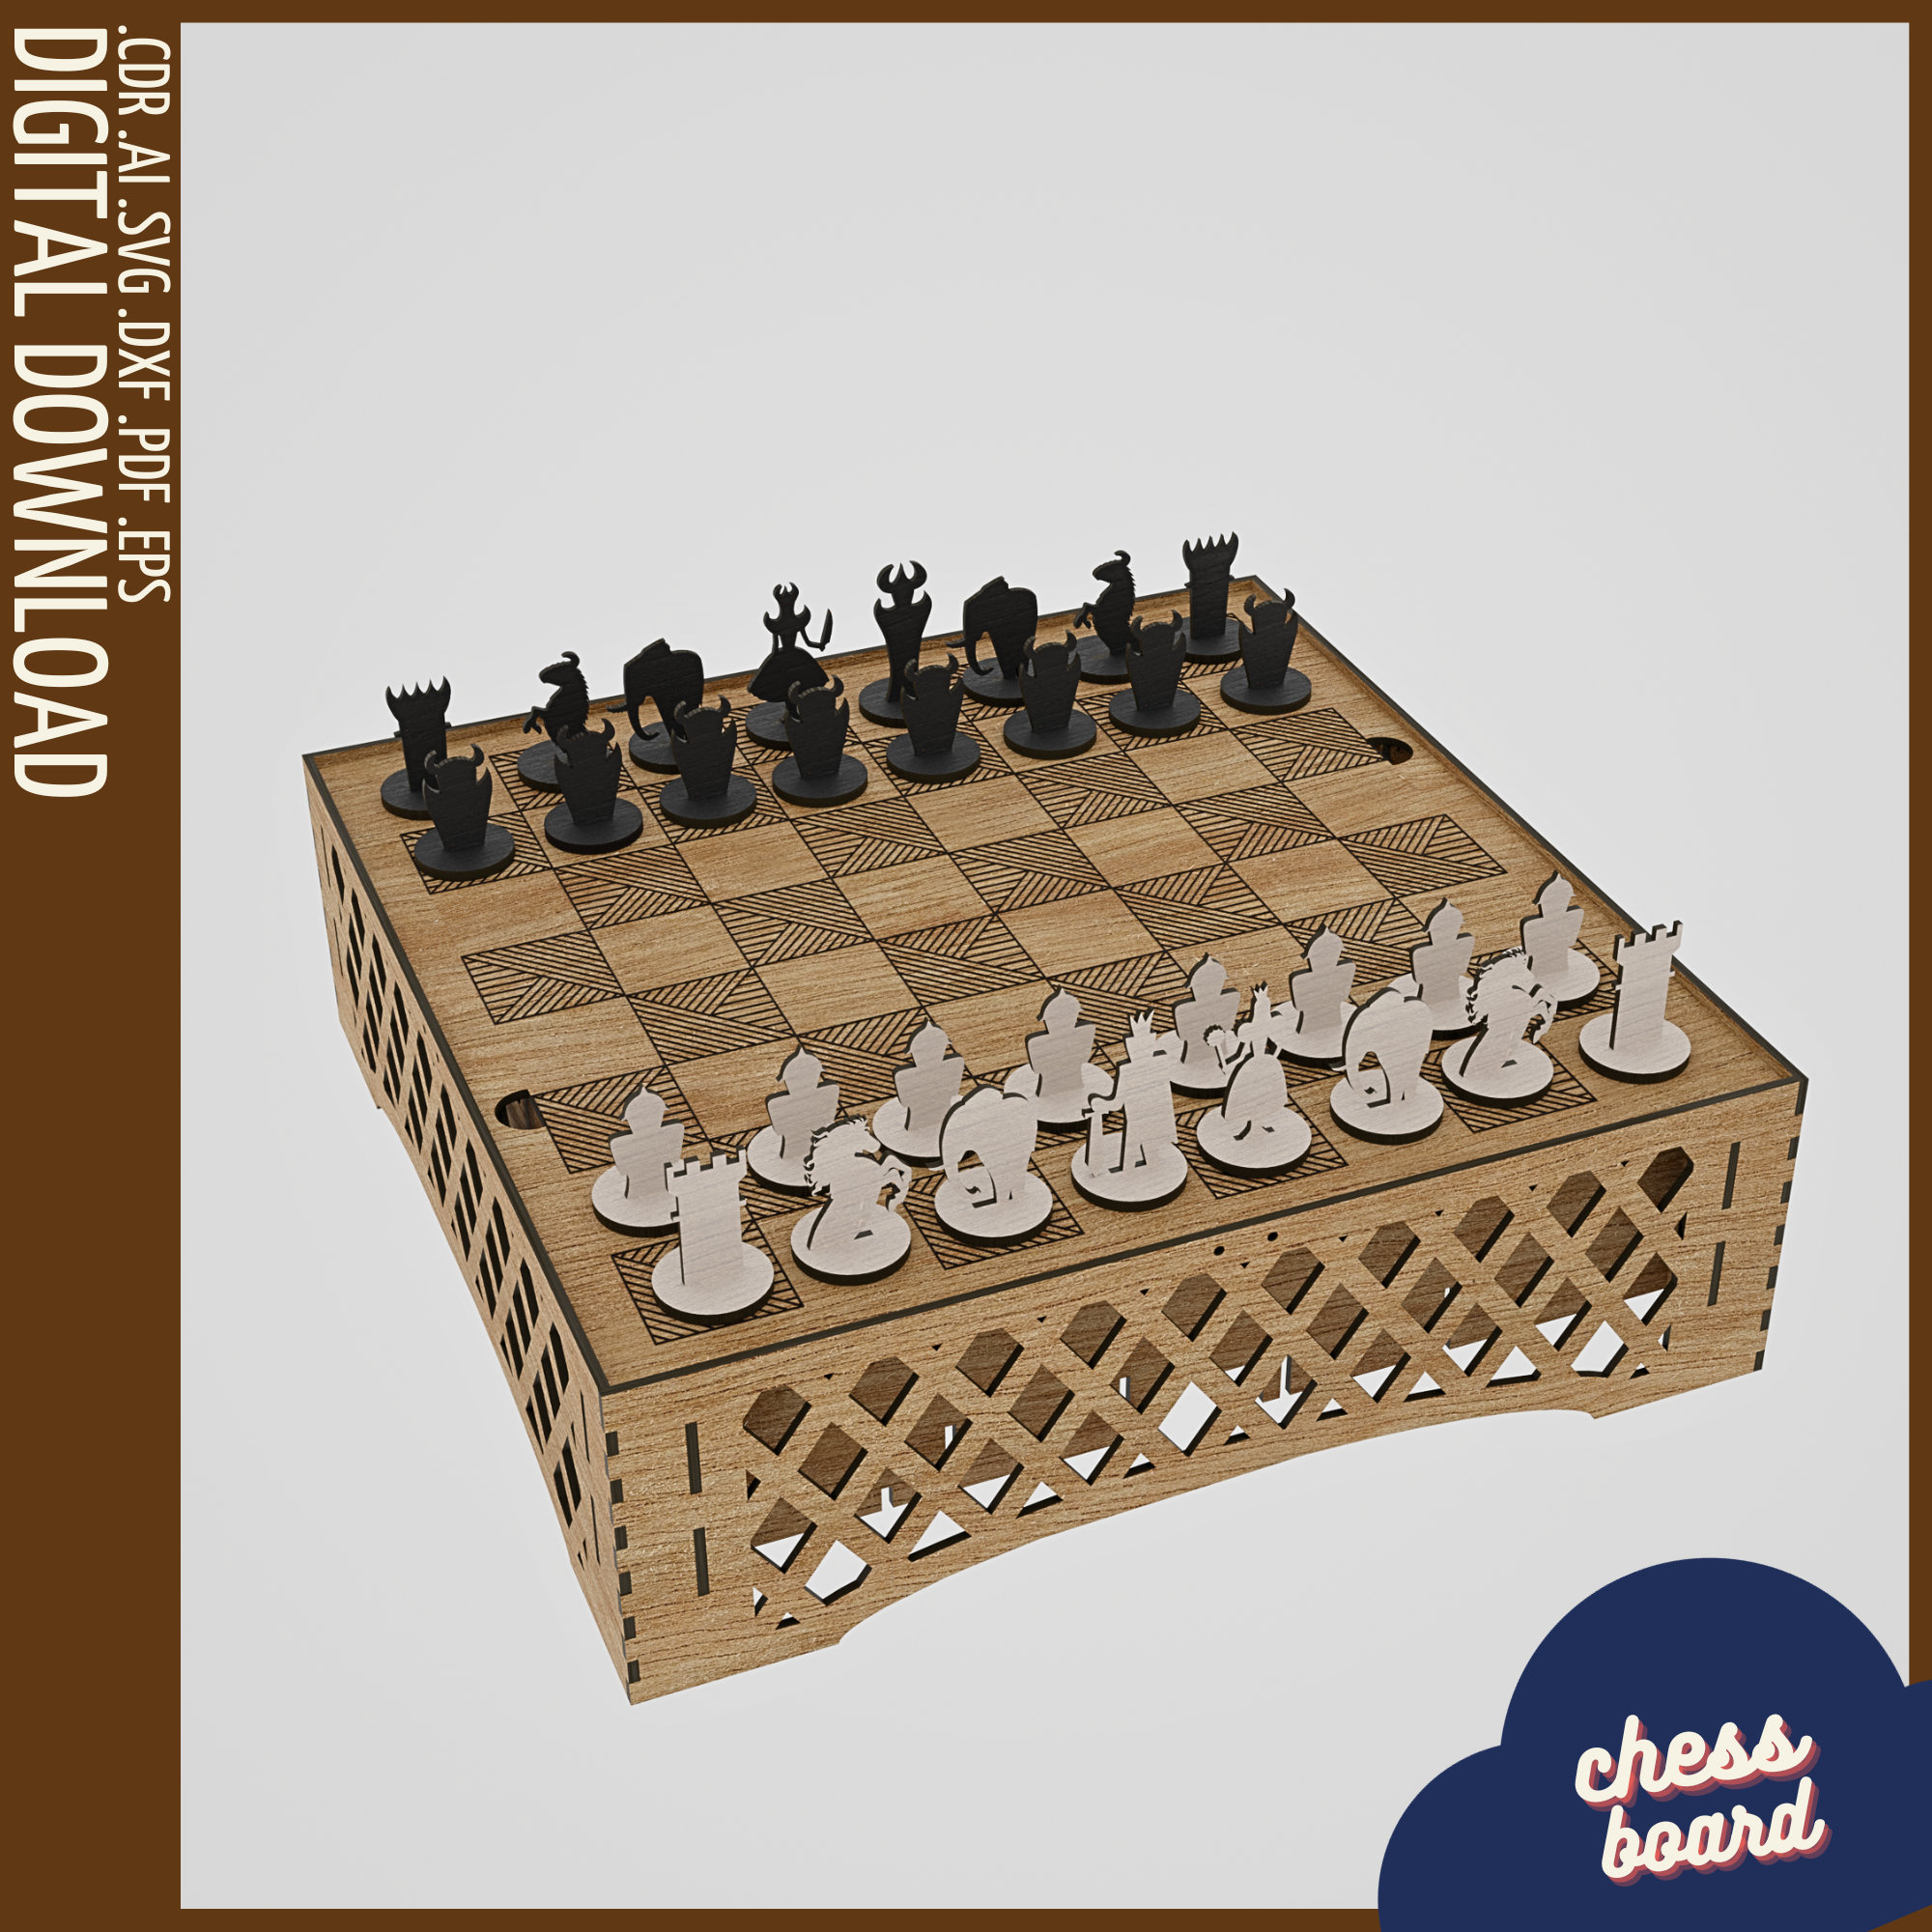 Laser Cut Wooden Chess Board & Pieces 4mm Free Vector cdr Download